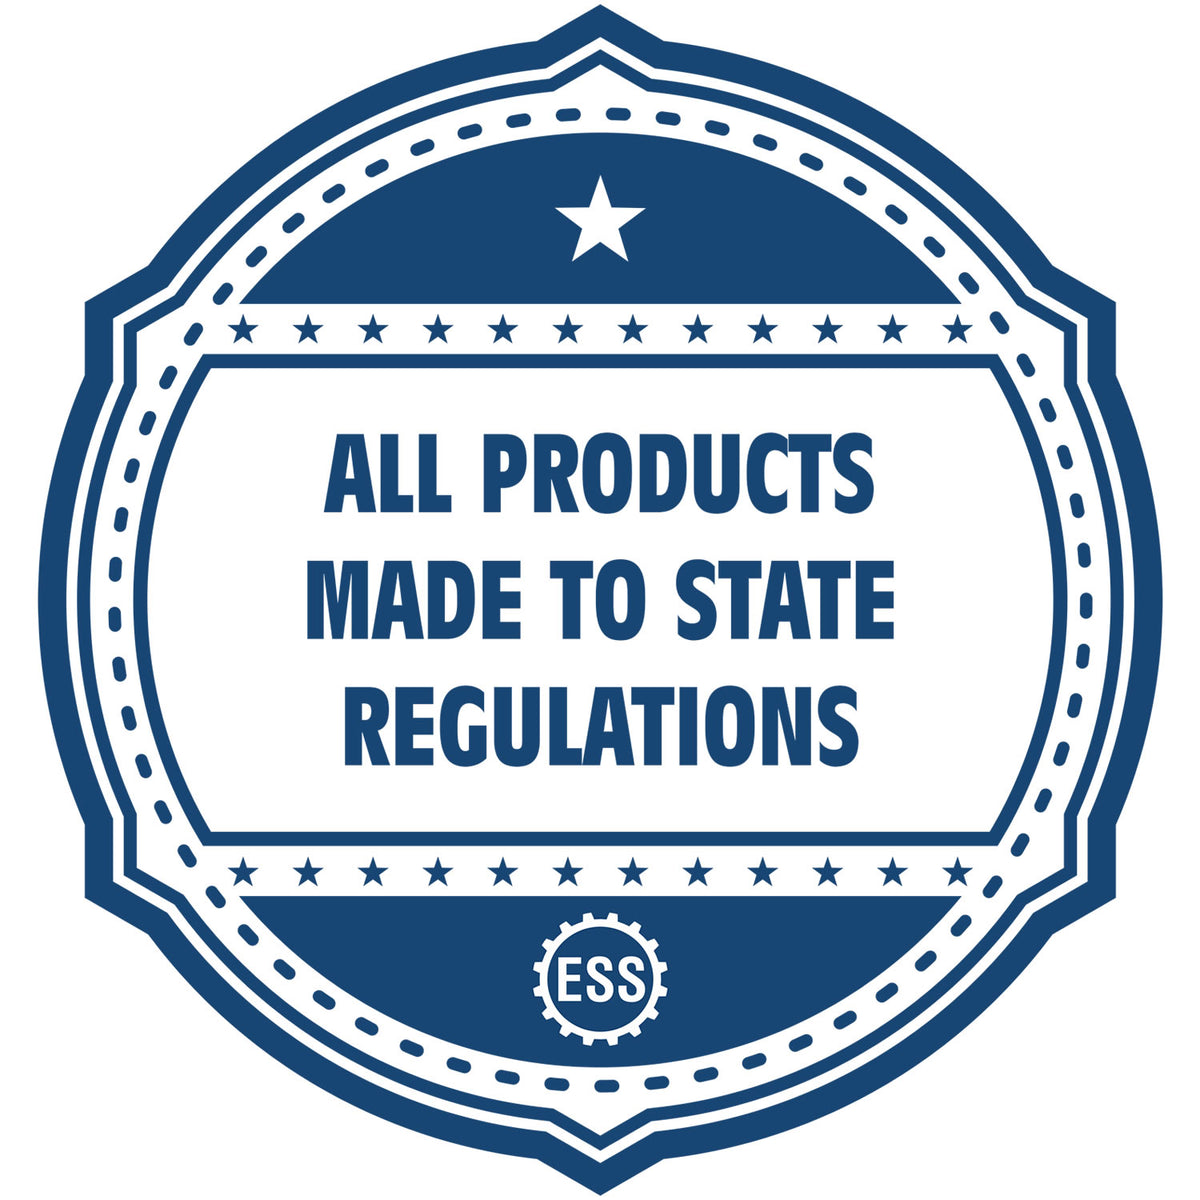 An icon or badge element for the Extended Long Reach Georgia Architect Seal Embosser showing that this product is made in compliance with state regulations.